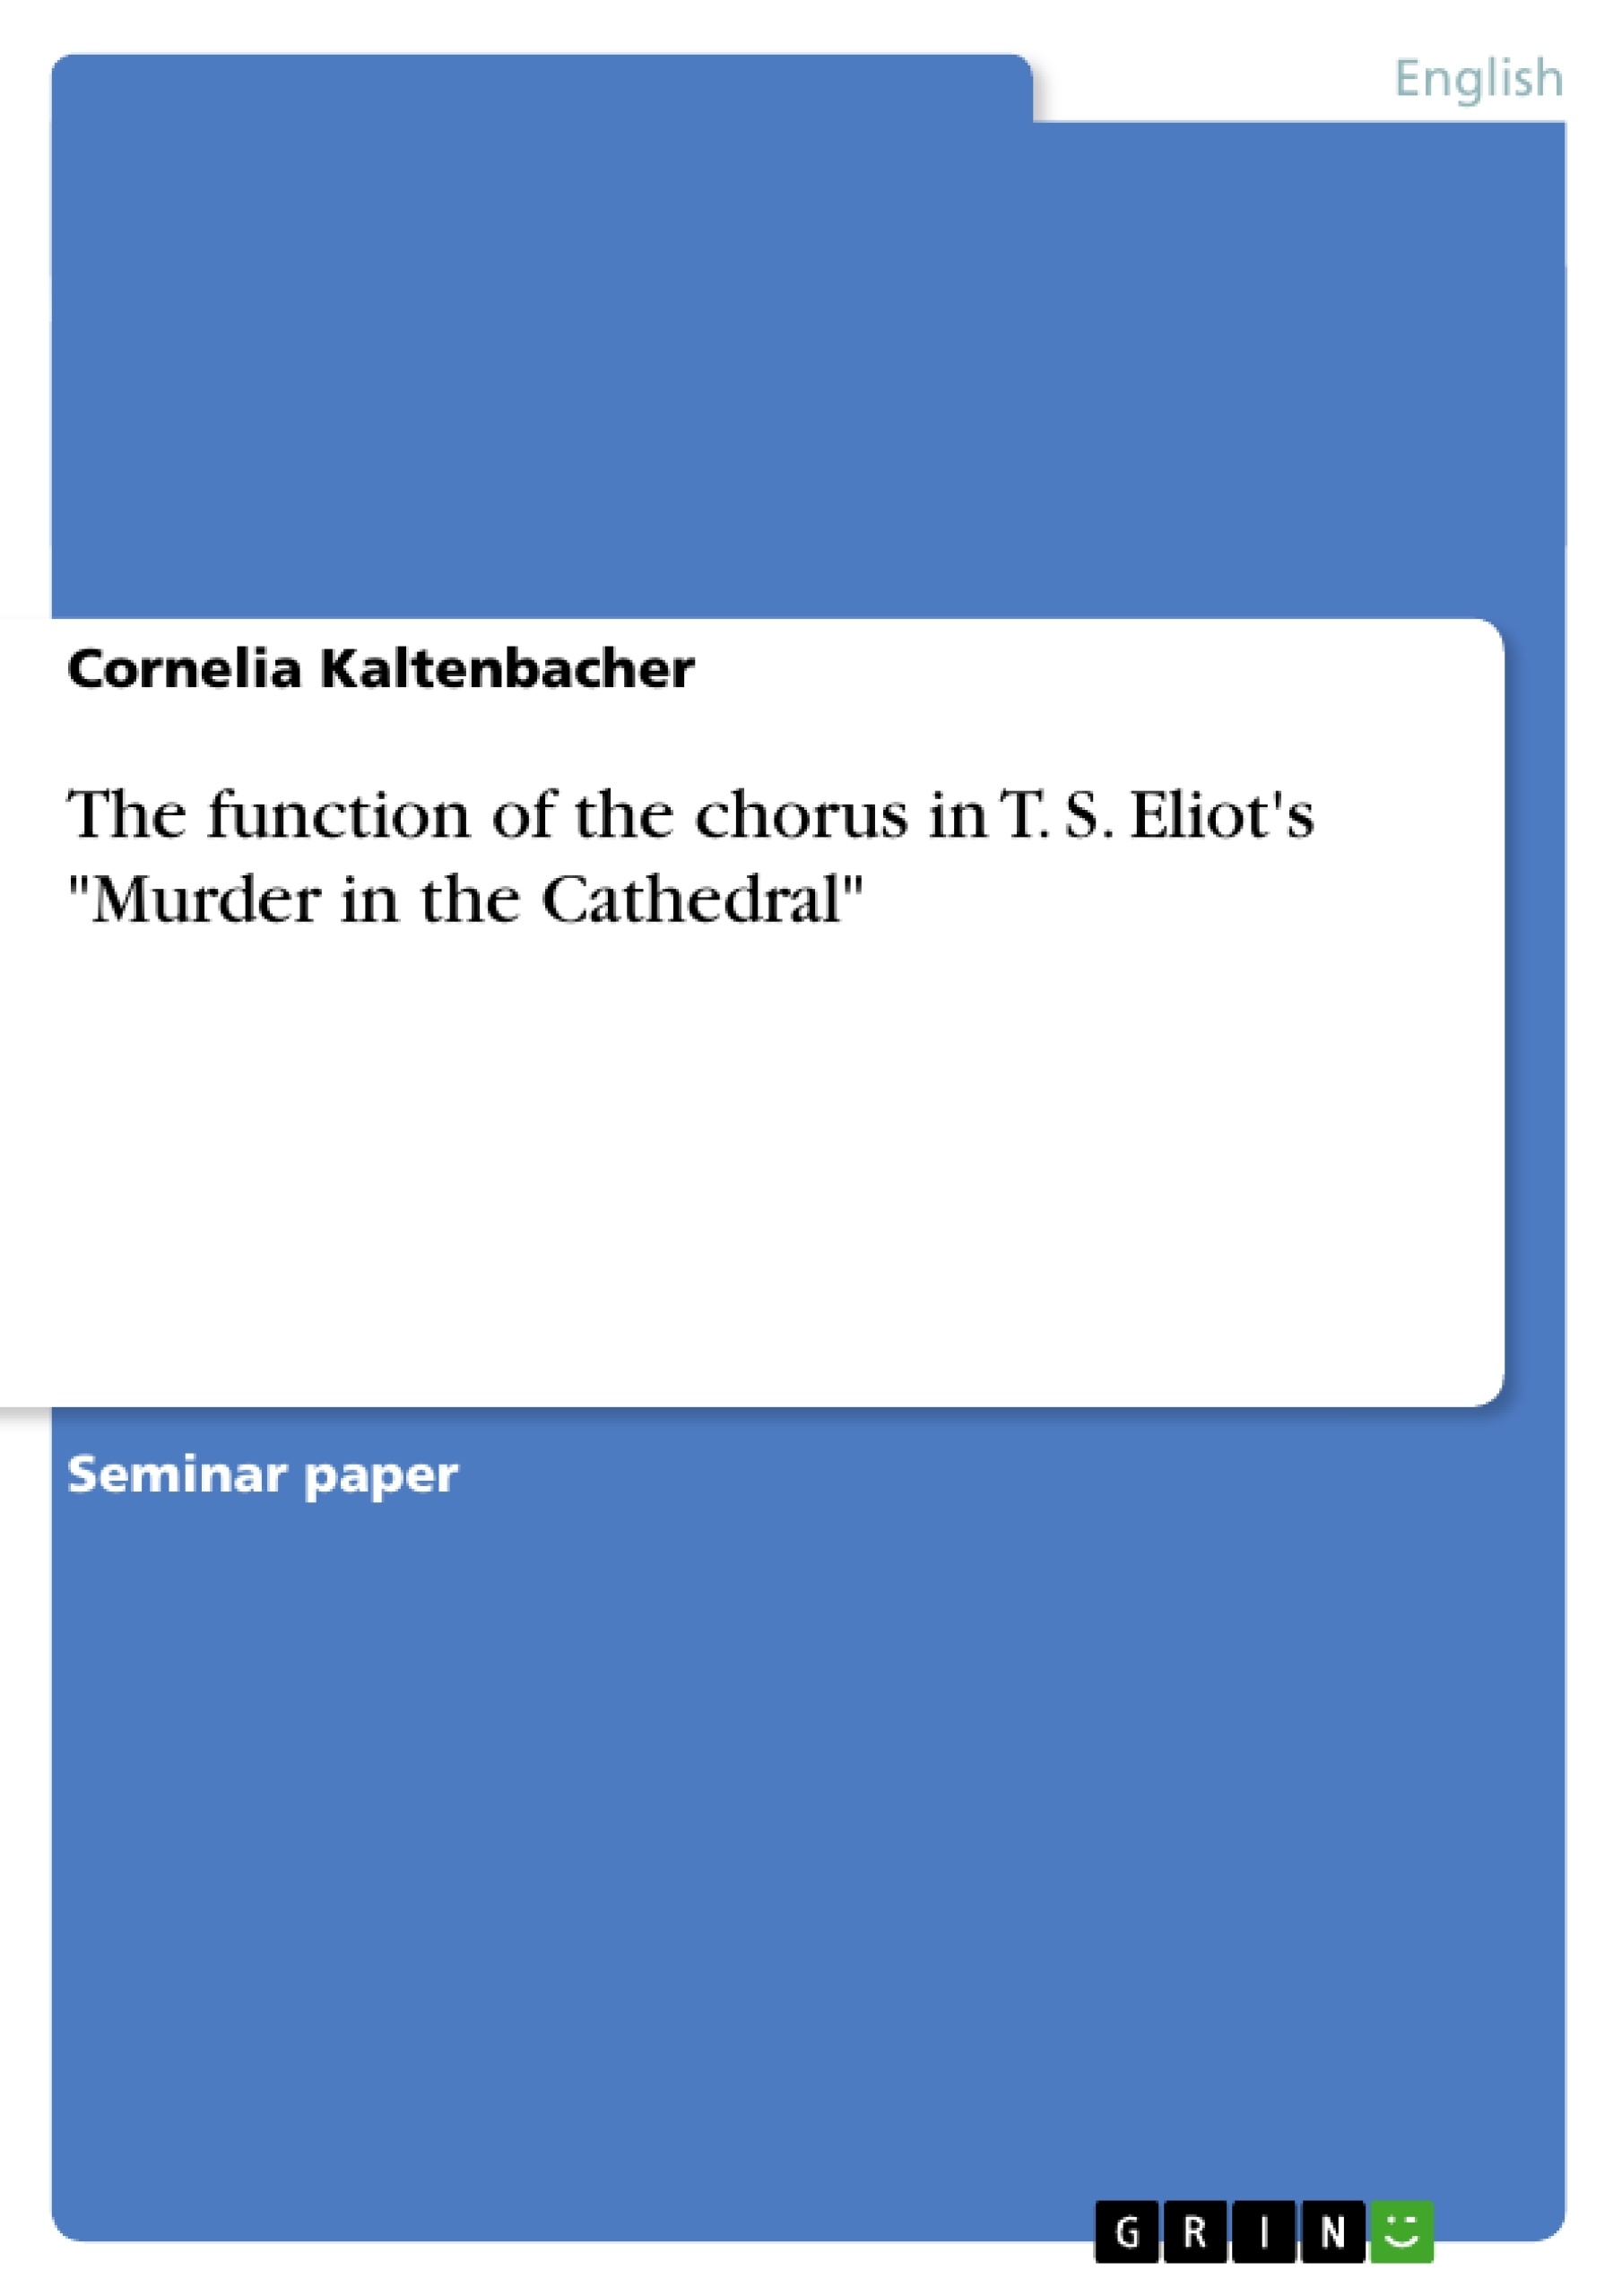 Title: The function of the chorus in T. S. Eliot's "Murder in the Cathedral"